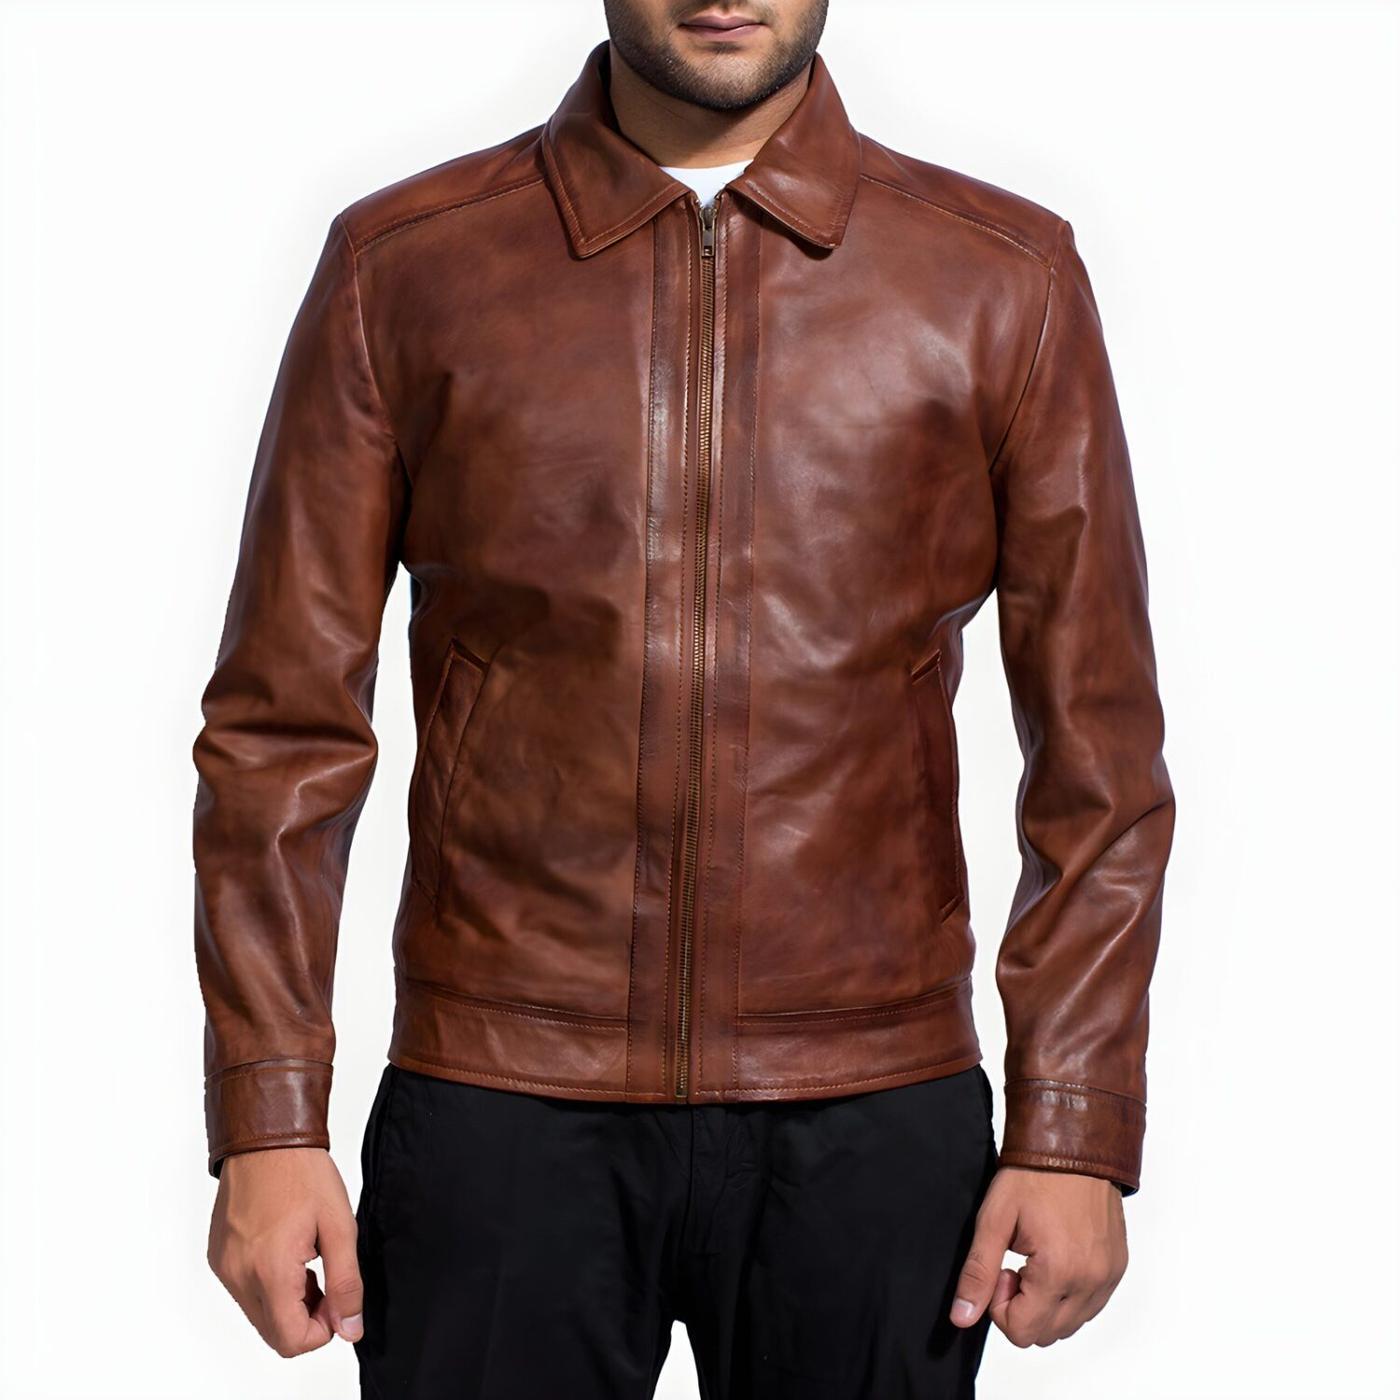 Brown Leather Jacket 1 Scaled 1